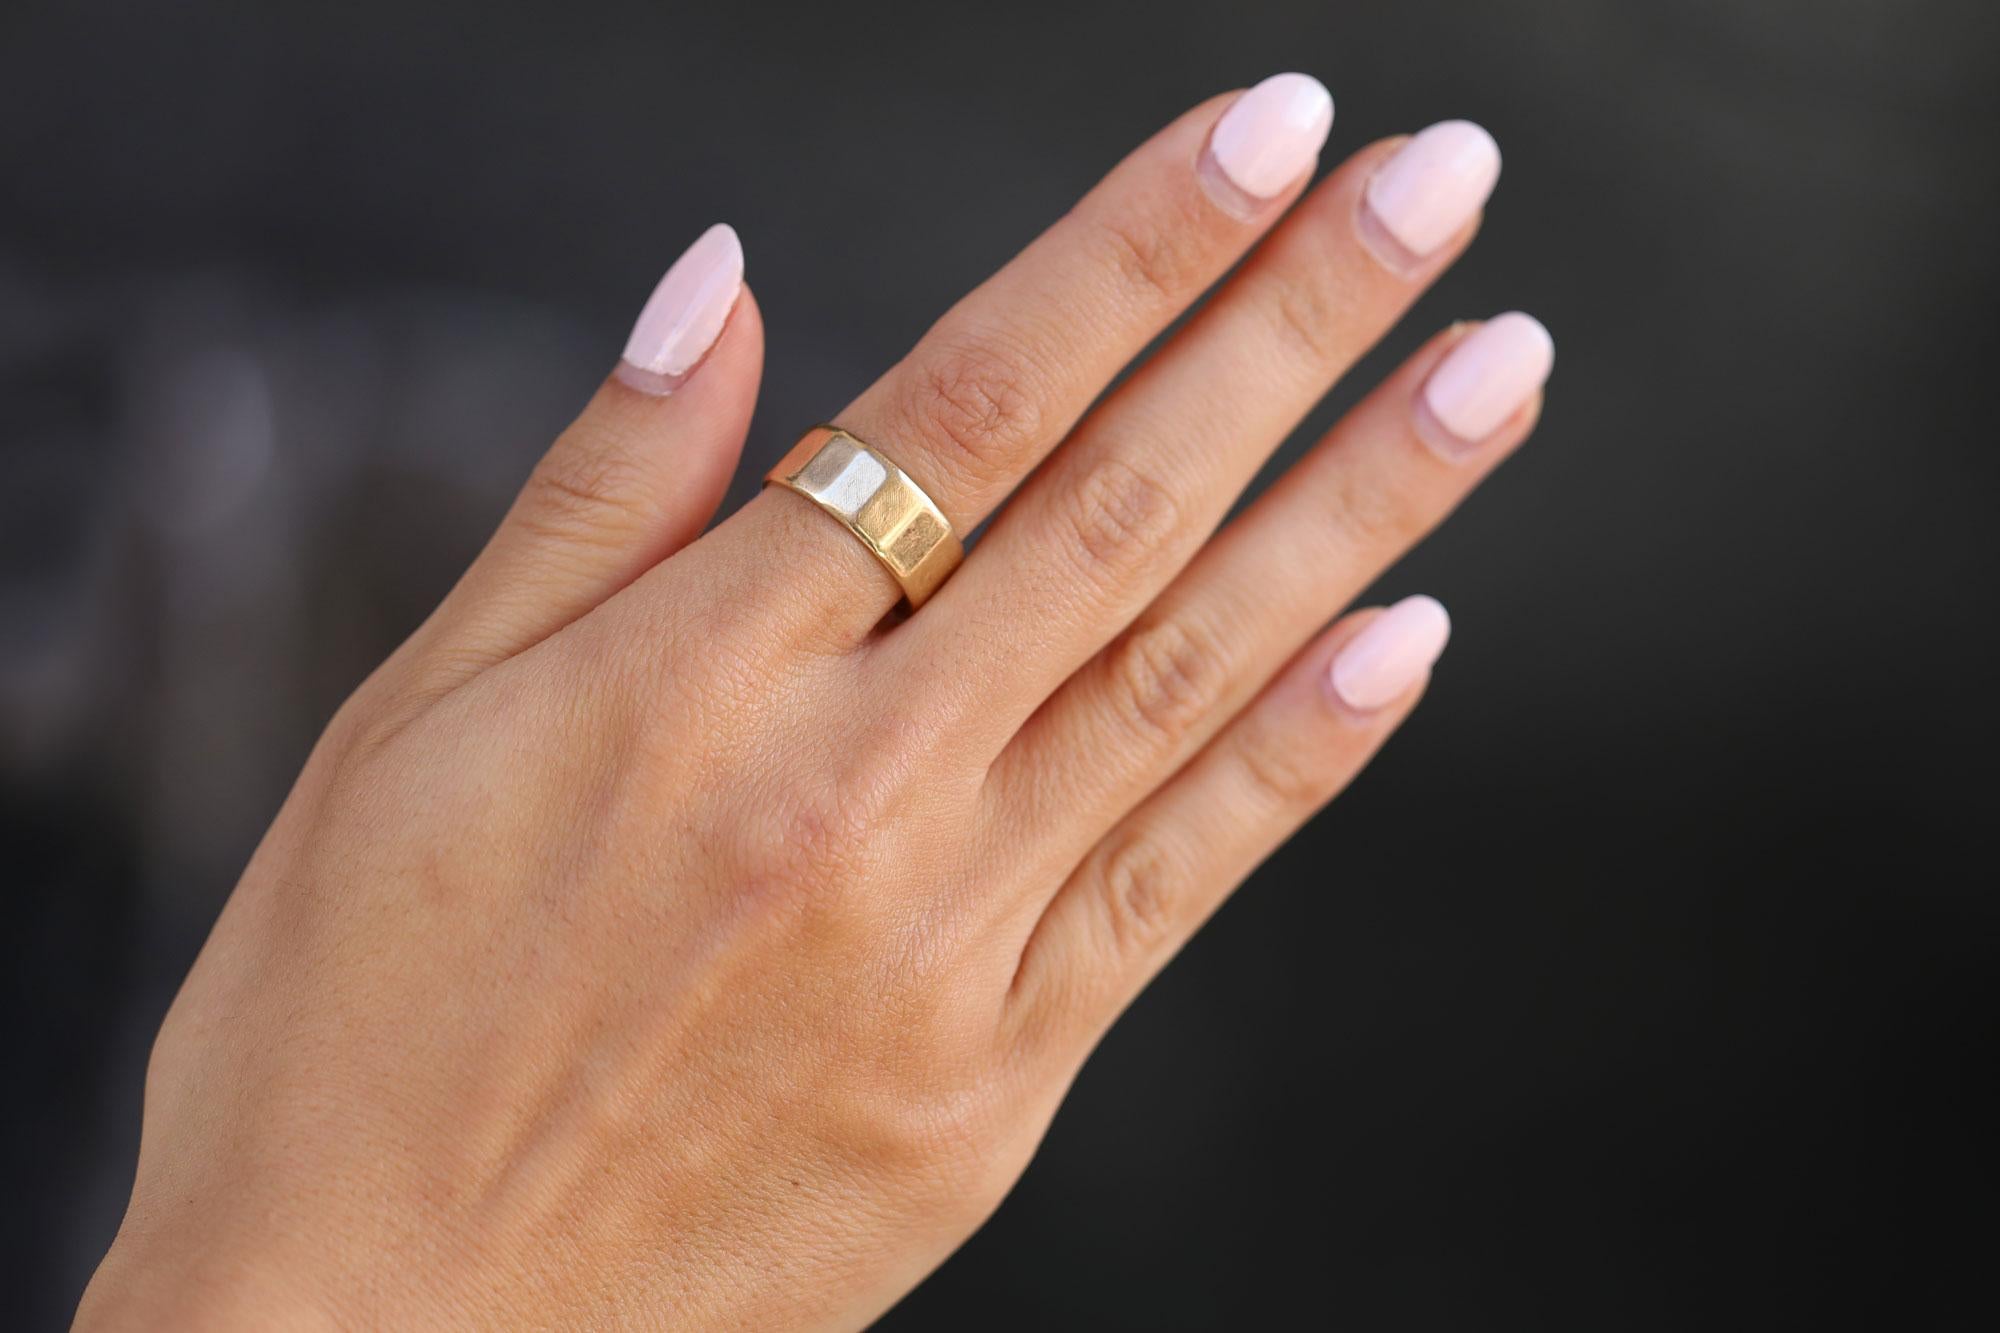 This vintage panel band will be your new favorite every-day ring. Hand crafted in 14k yellow gold, this band provides a classic look that won't break the bank. With unique Florentine detailing, the band's geometric stations add a touch of artistry